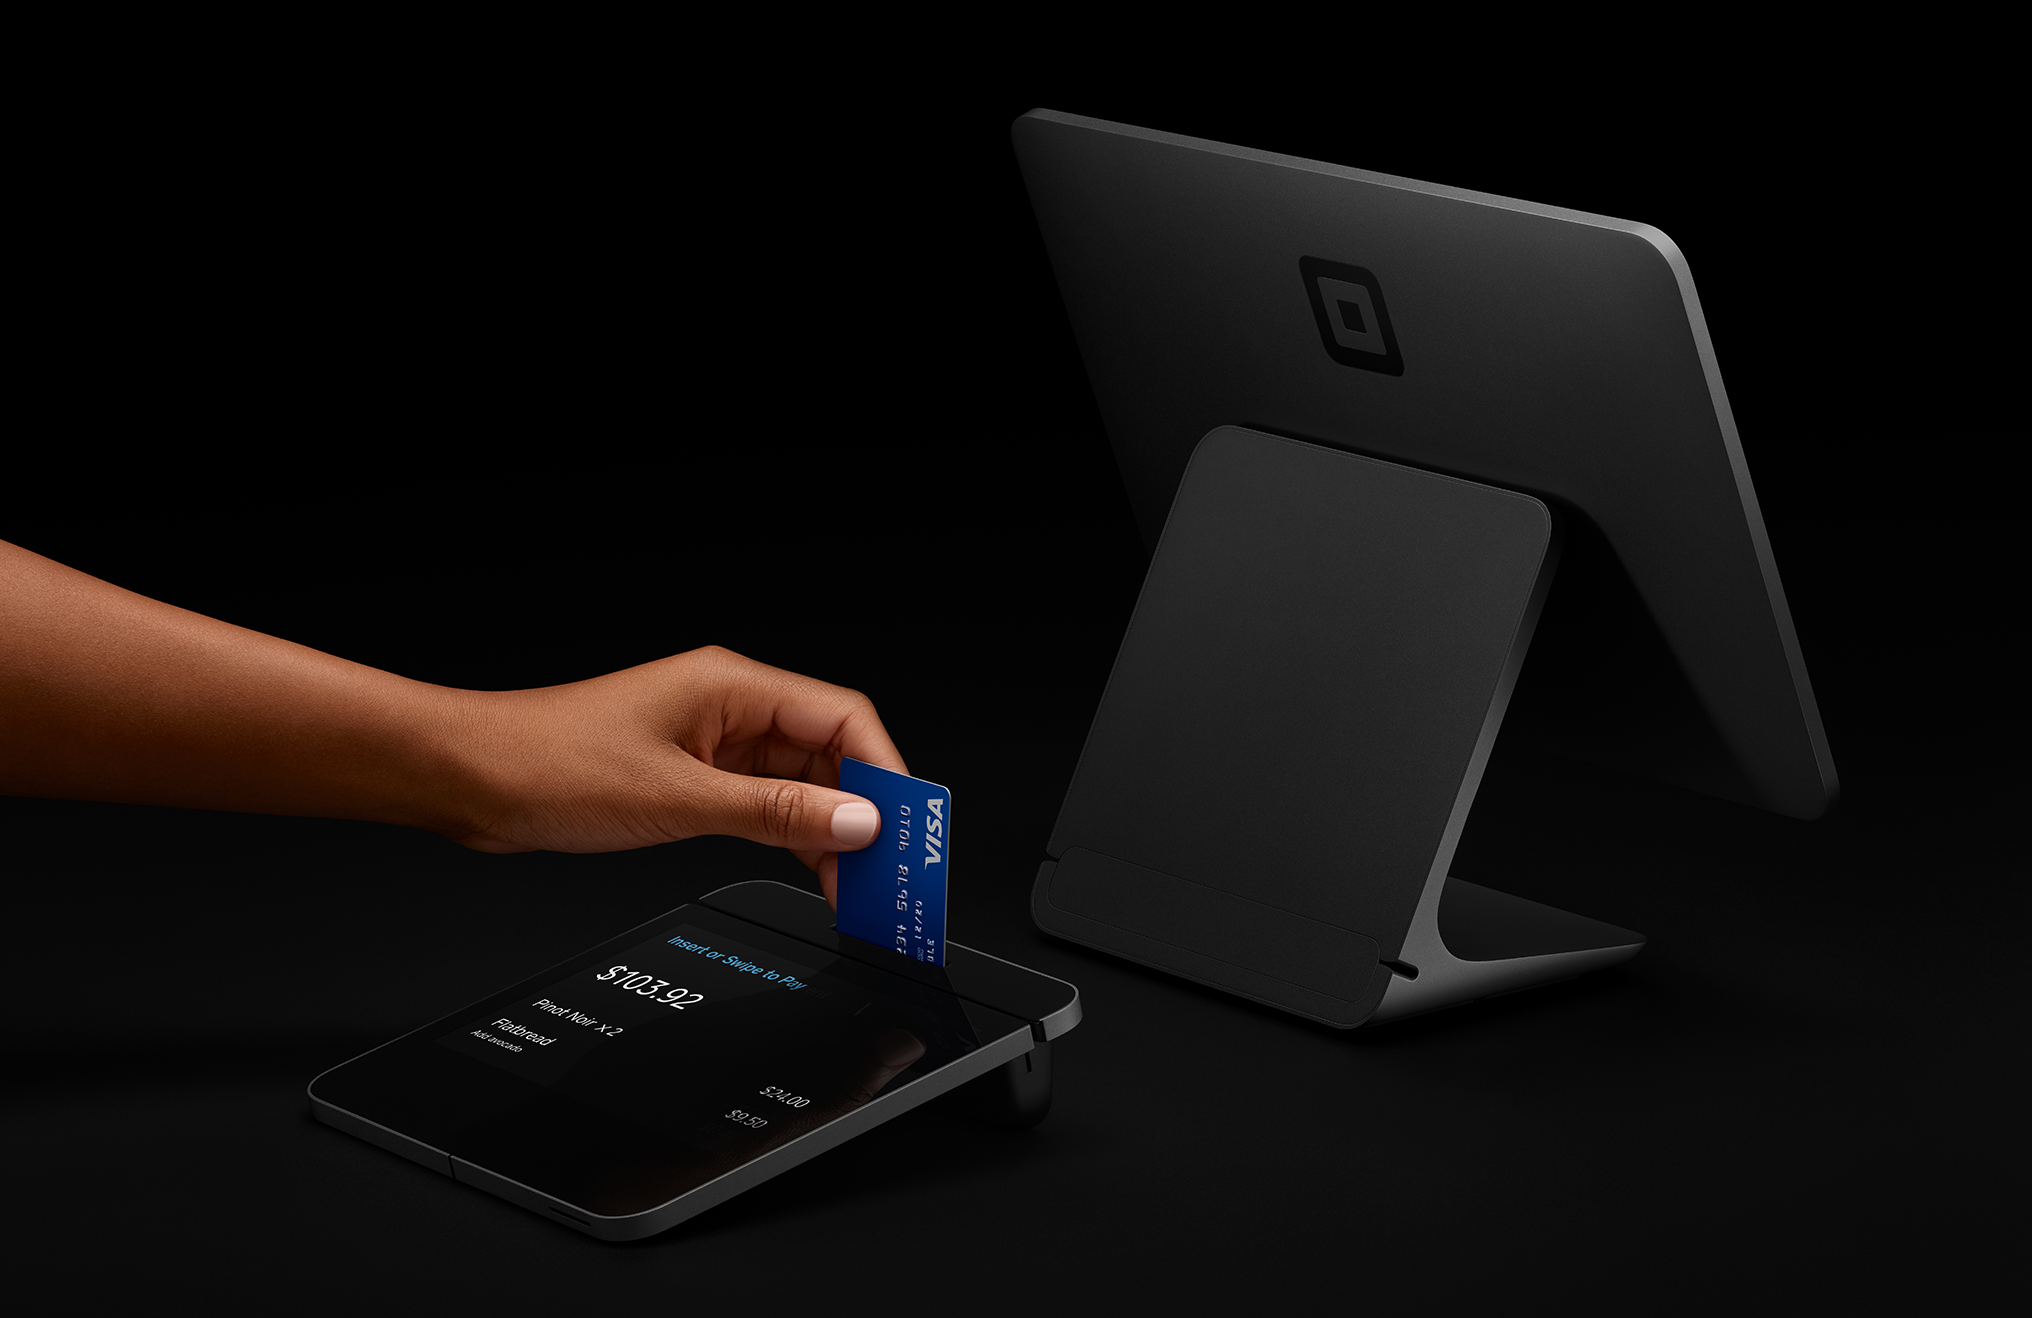 Square Invests $50M In Bitcoin; Dorsey Sees A Currency For The Internet